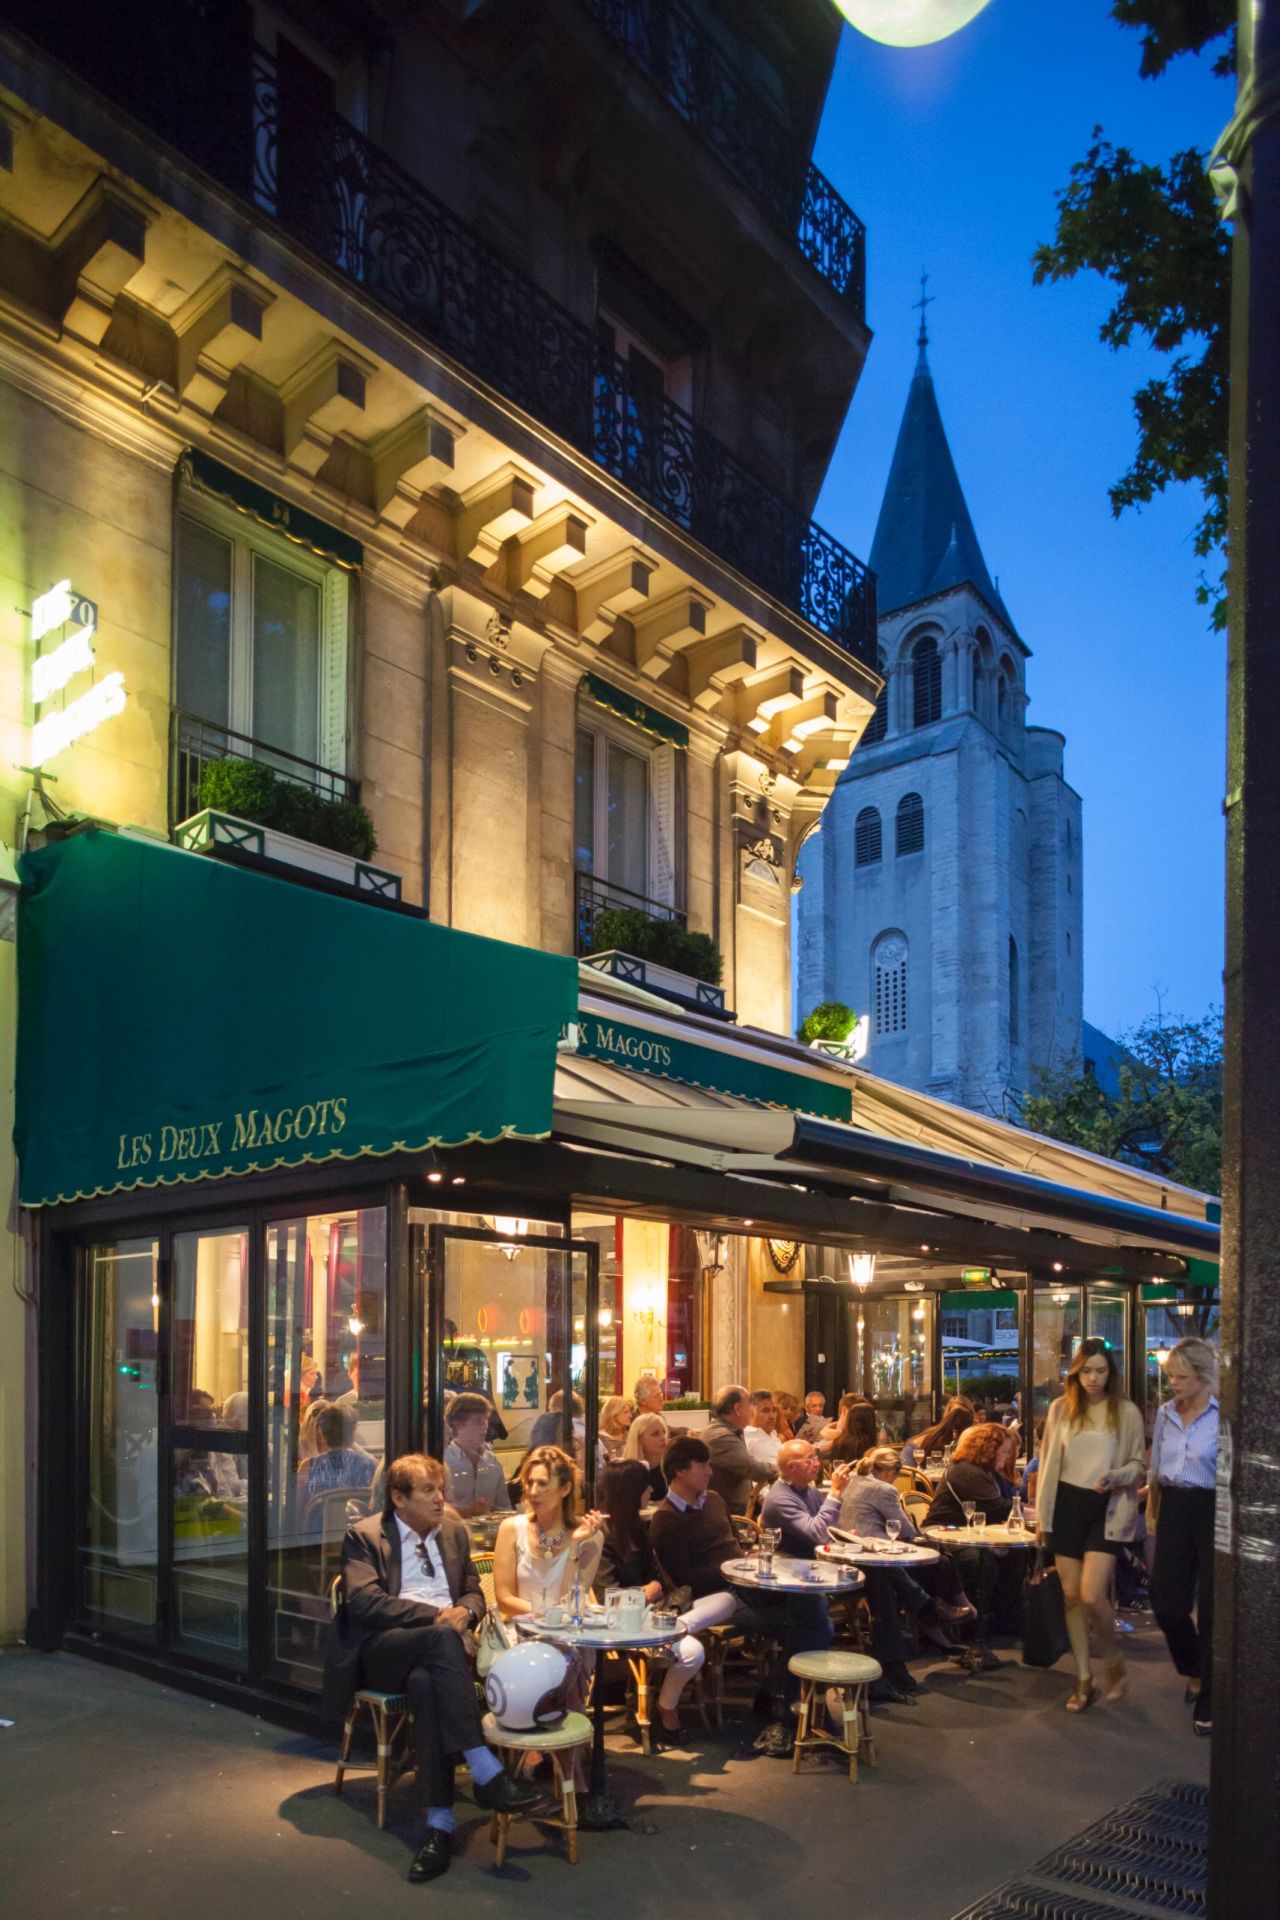 Picasso, Elsa Triolet, Simone de Beauvoir, Jean-Paul Sartre and Albert Camus were among frequent patrons. The cafe instituted the prestigious Deux Magots Literary Prize in 1933, which continues to this day.